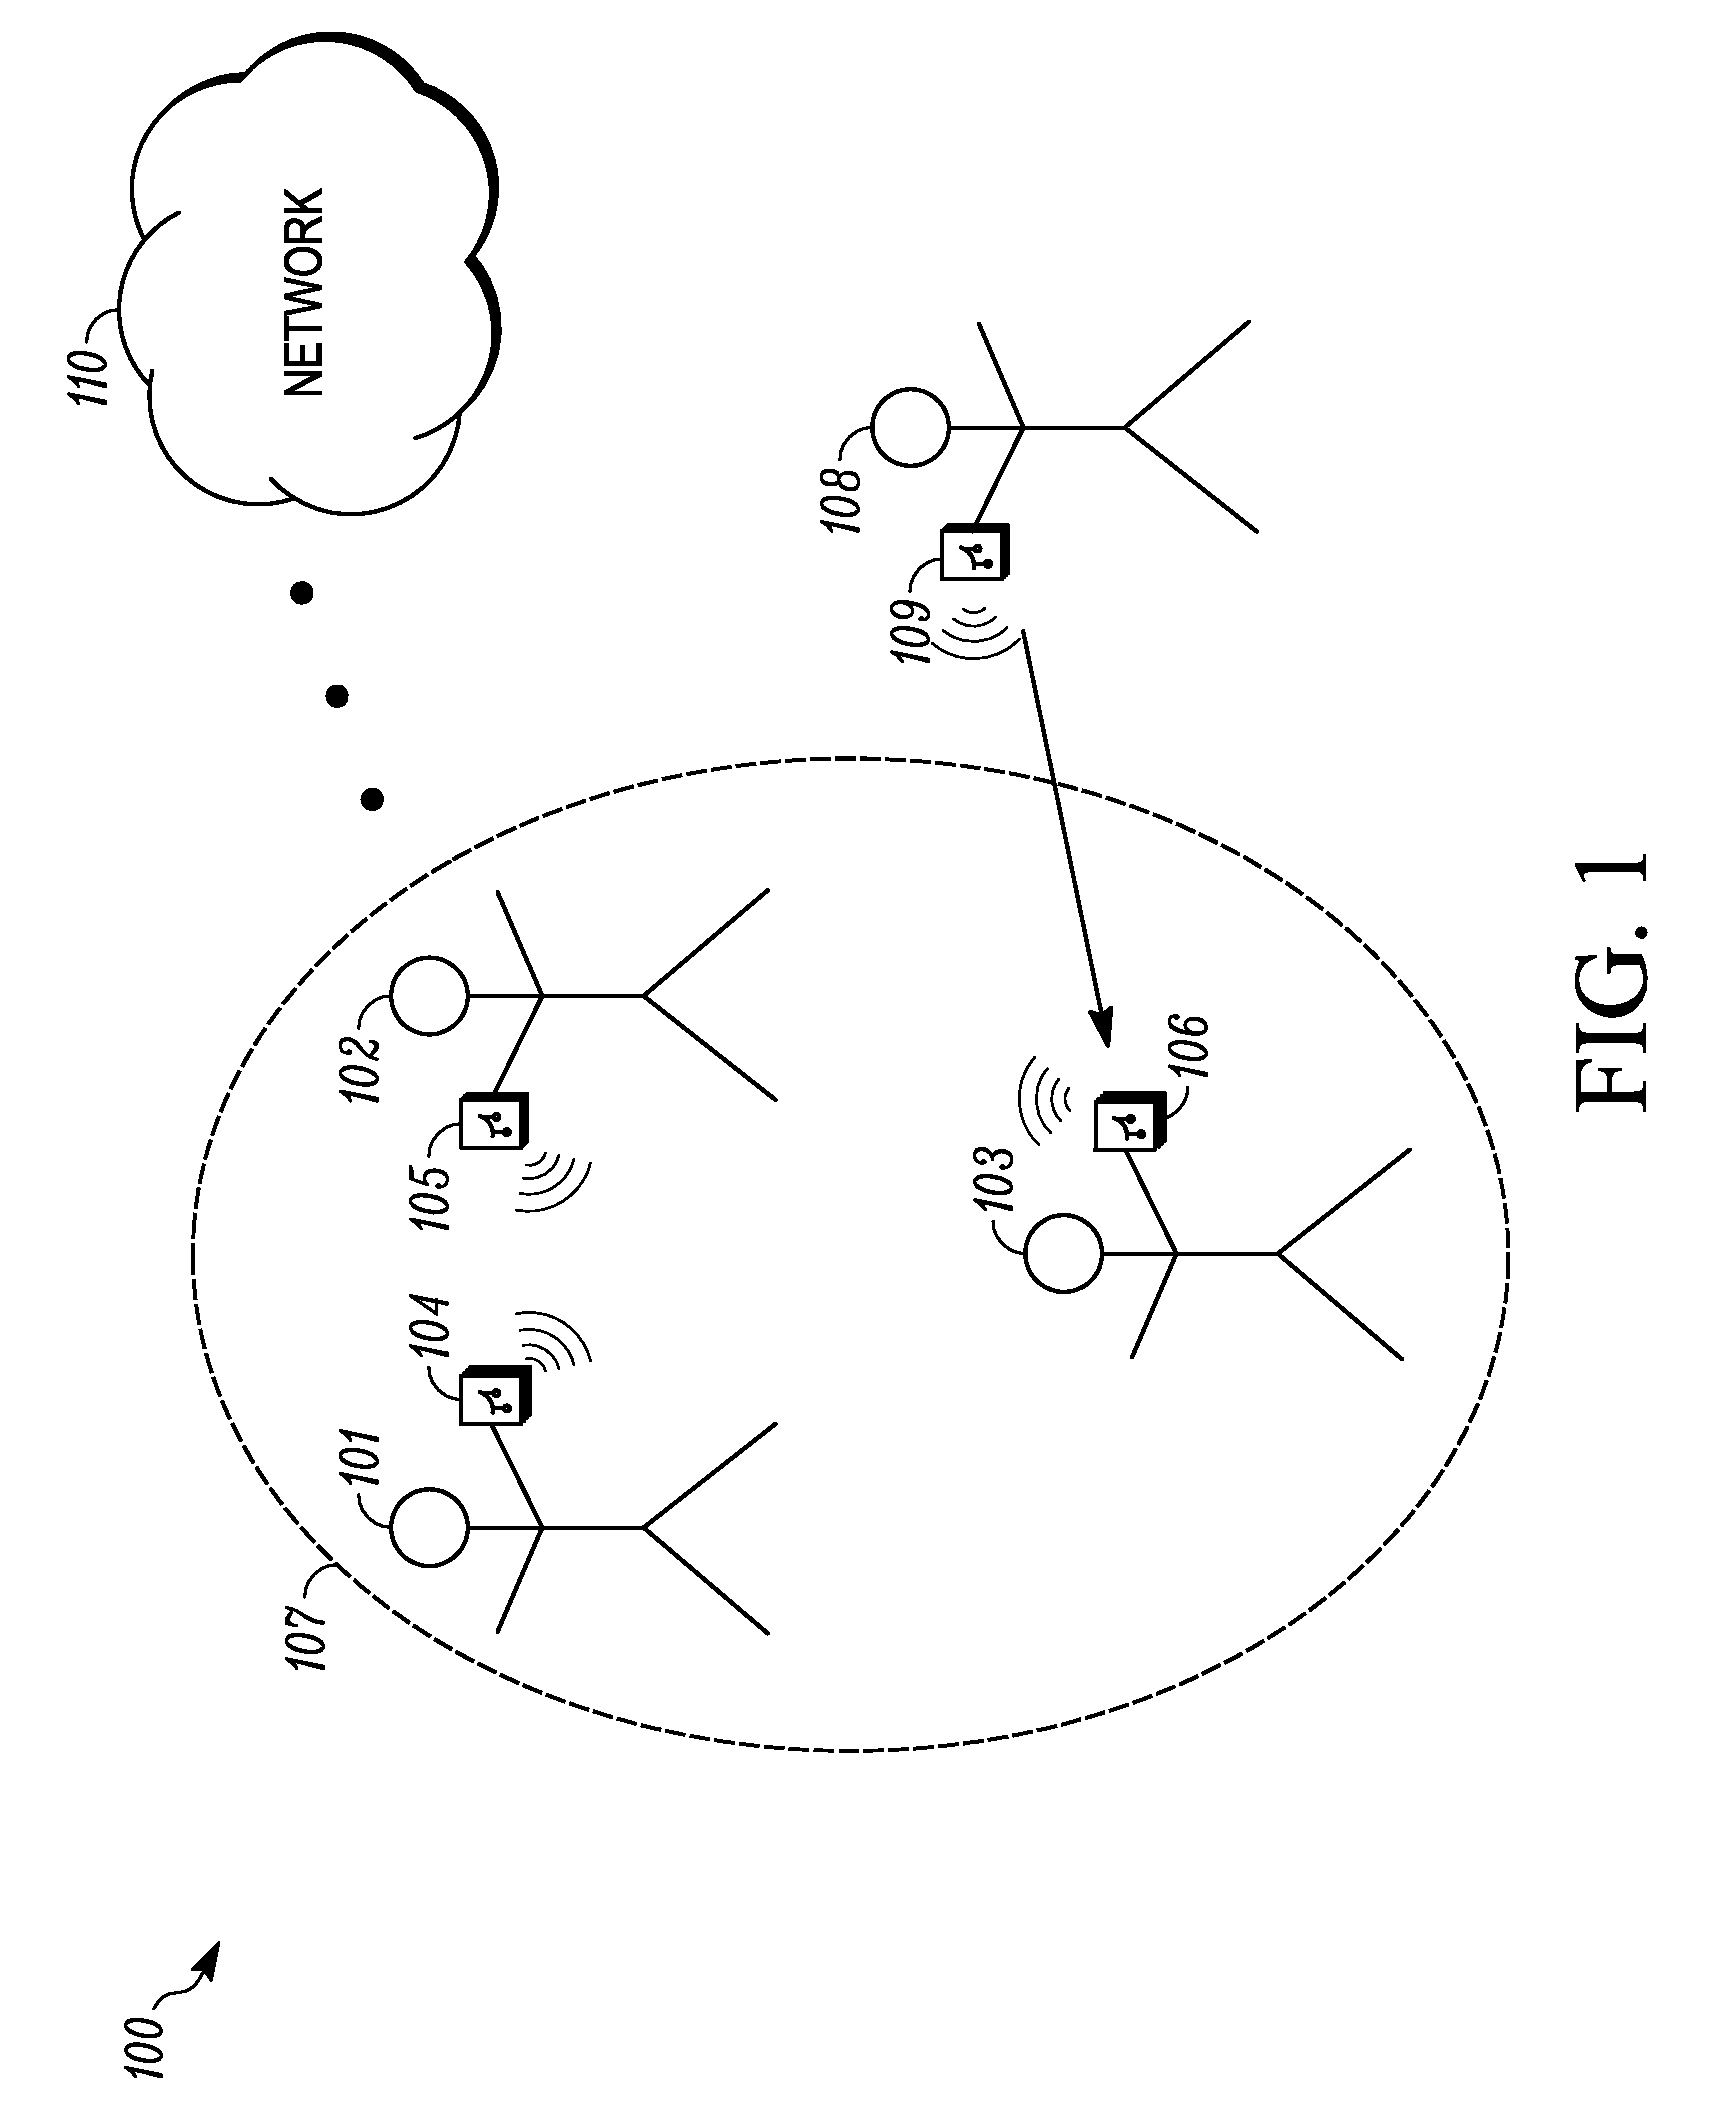 Systems and methods for syncronizing multiple electronic devices